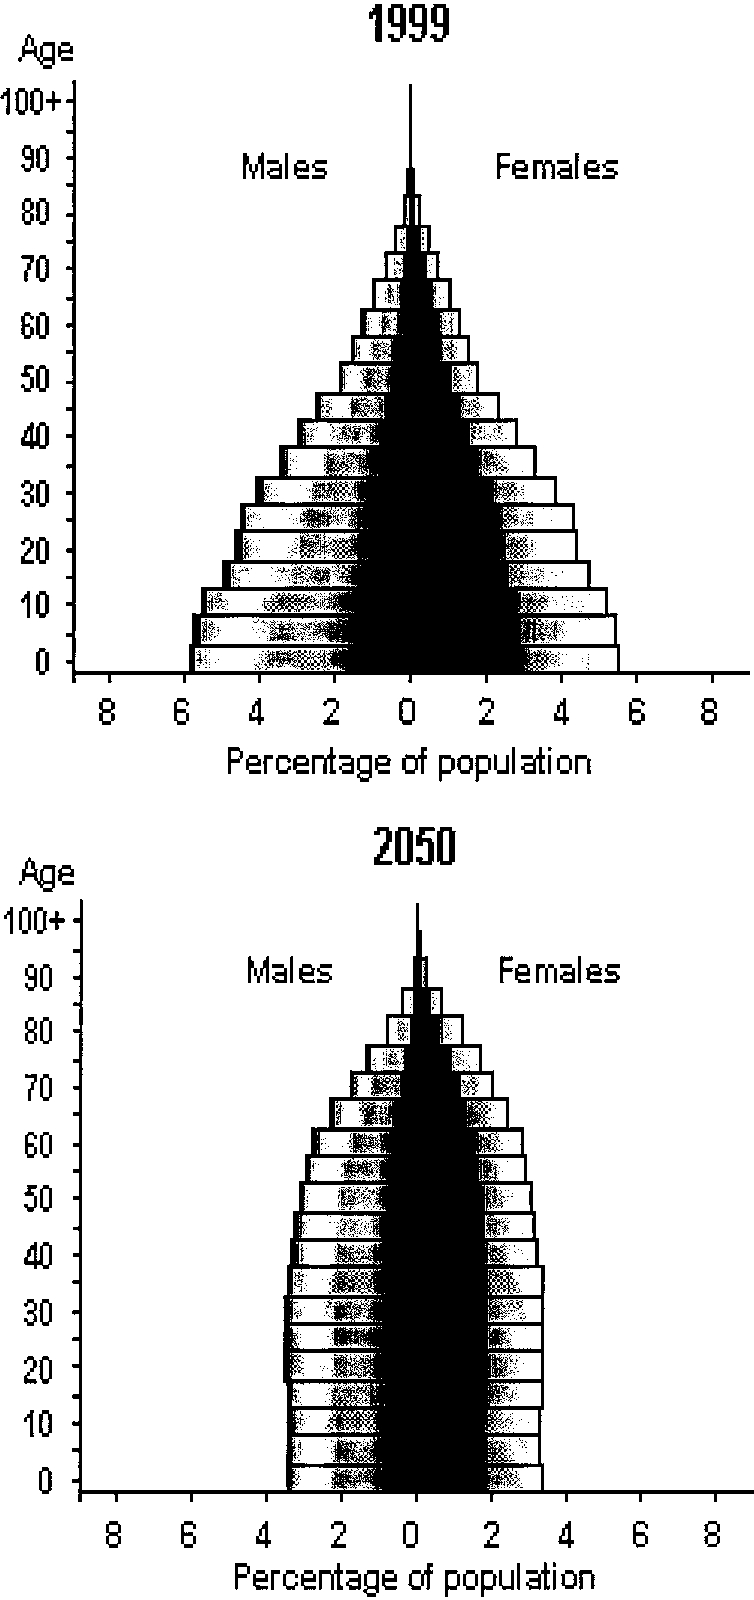 Age Structure Diagram The Demographic Transition In The Less Developed Countries